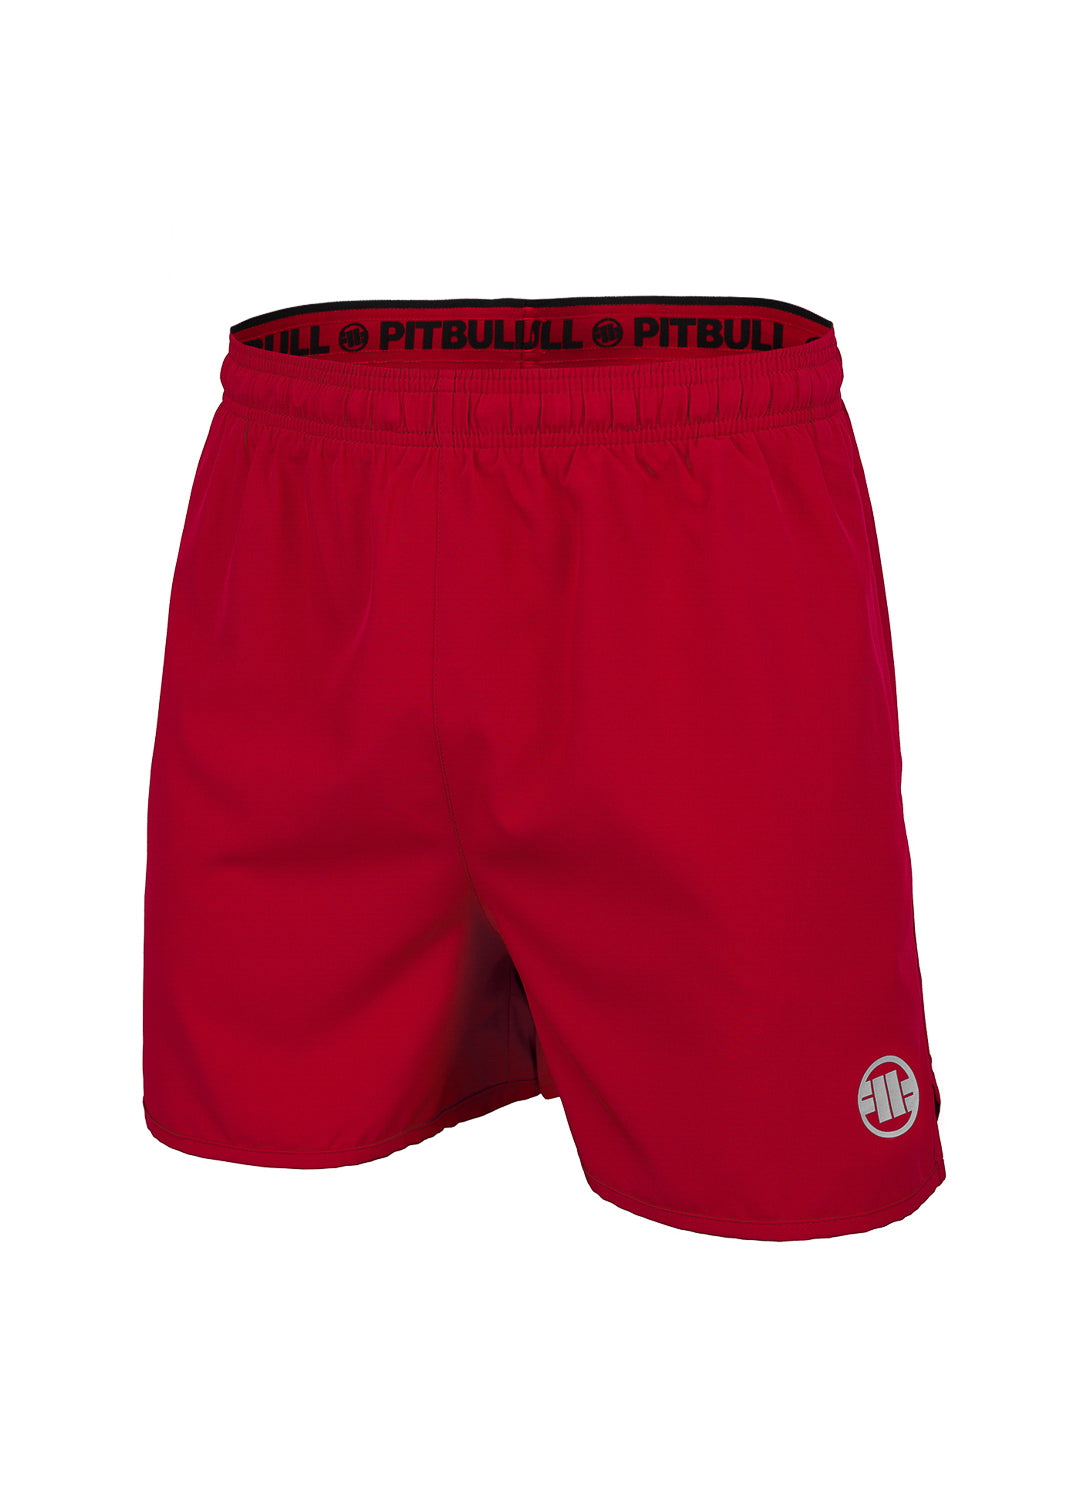 SMALL LOGO 2 Performance Red Shorts